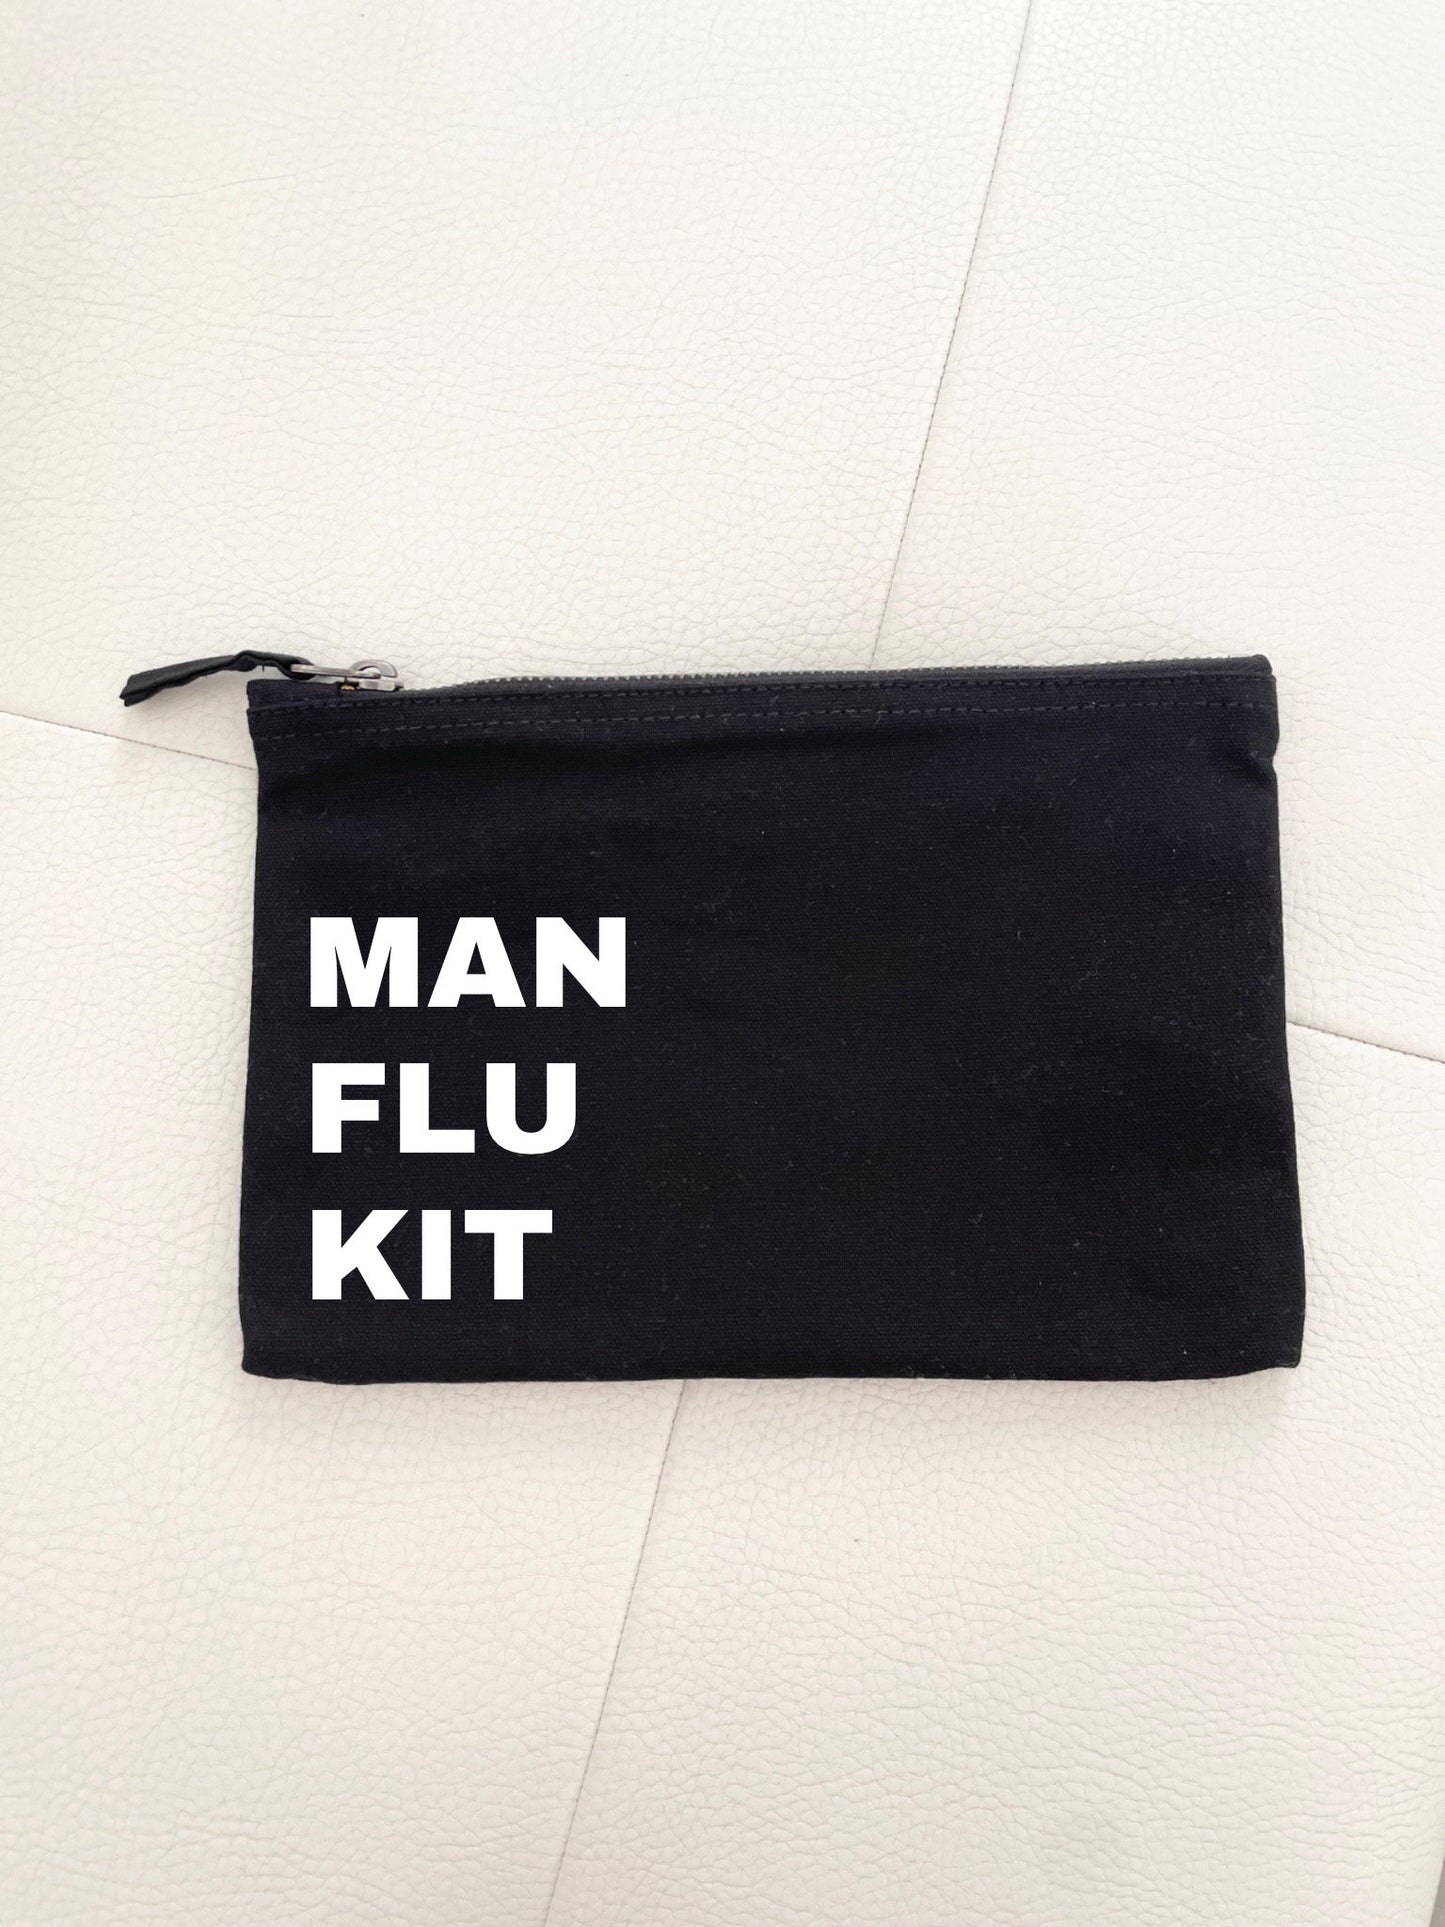 Man flu kit, cold and flu medication case, man flu essentials, jokey presents for men, cheeky stocking fillers for male friends colleagues